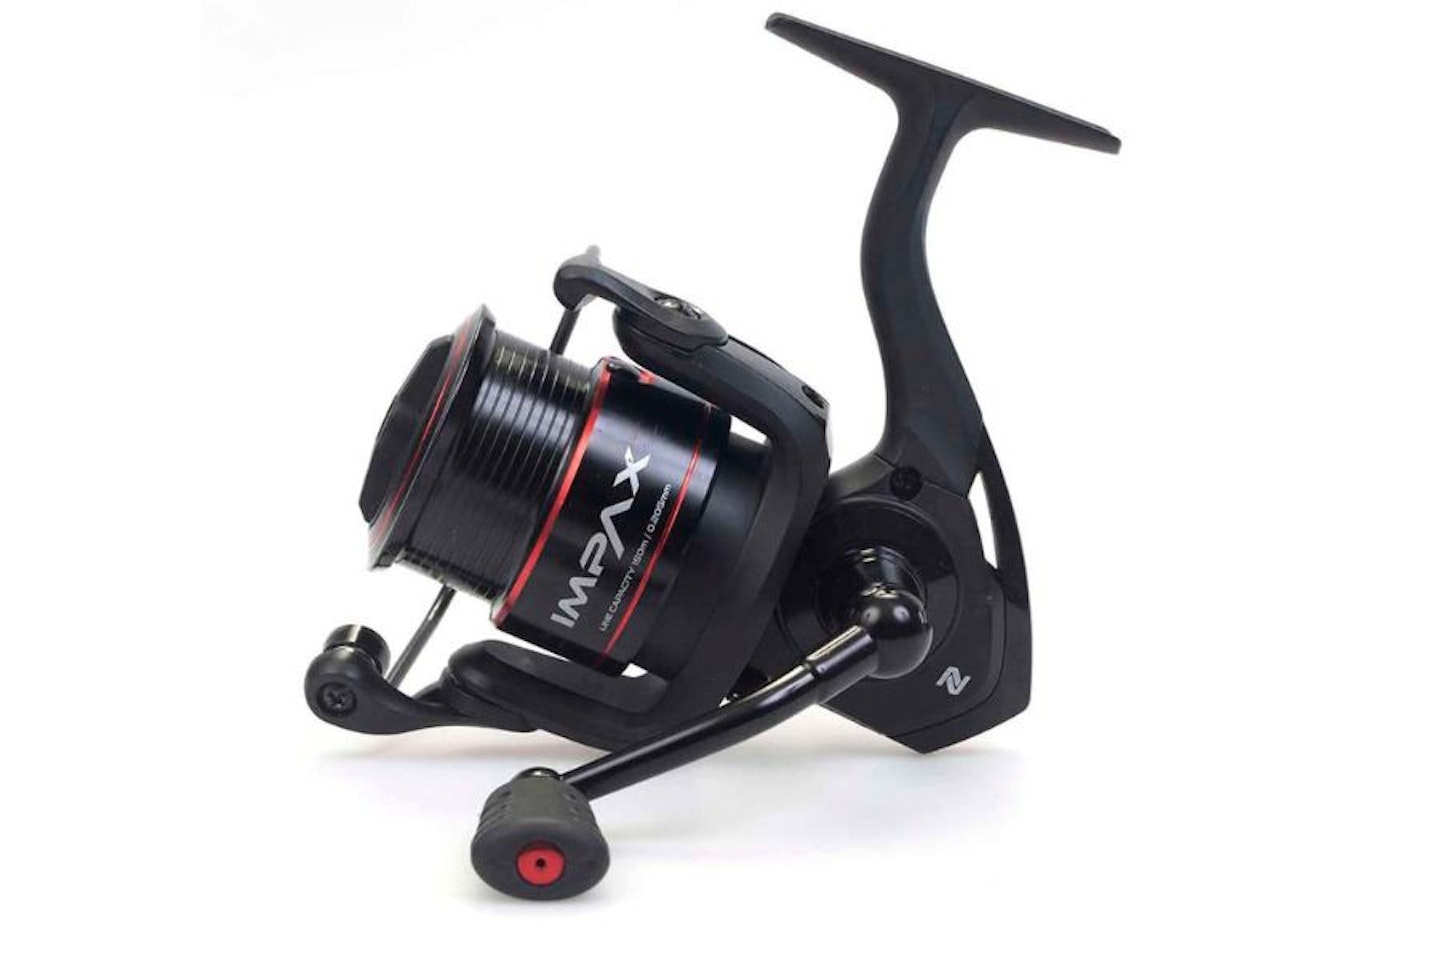 The best Black Friday fishing reel deals 2023